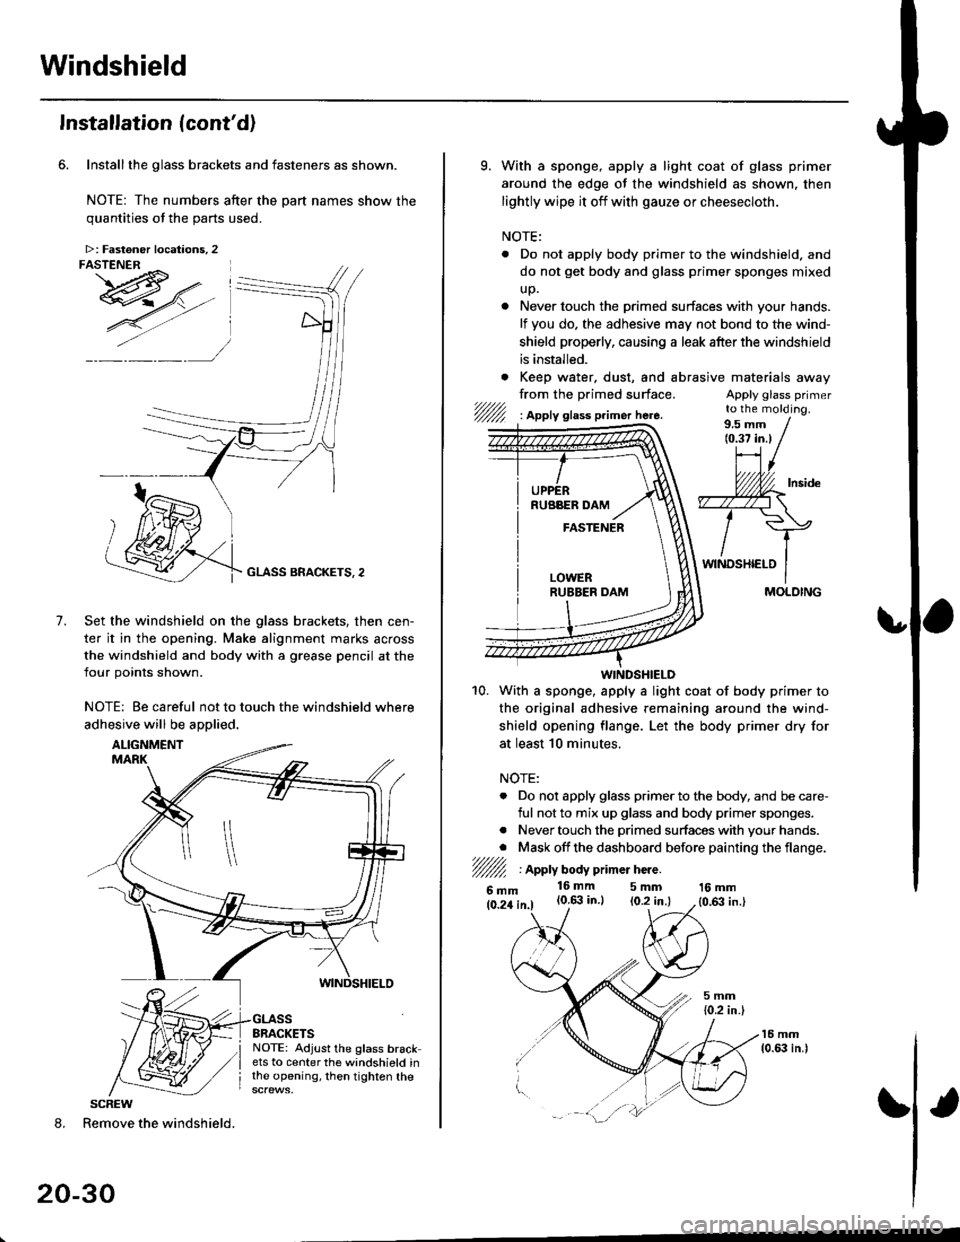 HONDA CIVIC 1998 6.G Workshop Manual Windshield
Installation (contd)
Installthe glass brackets and fasteners as shown.
NOTE: The numbers after the part names show thequantities of the oarts used.
GLASS BRACKETS, 2
Set the windshield on 